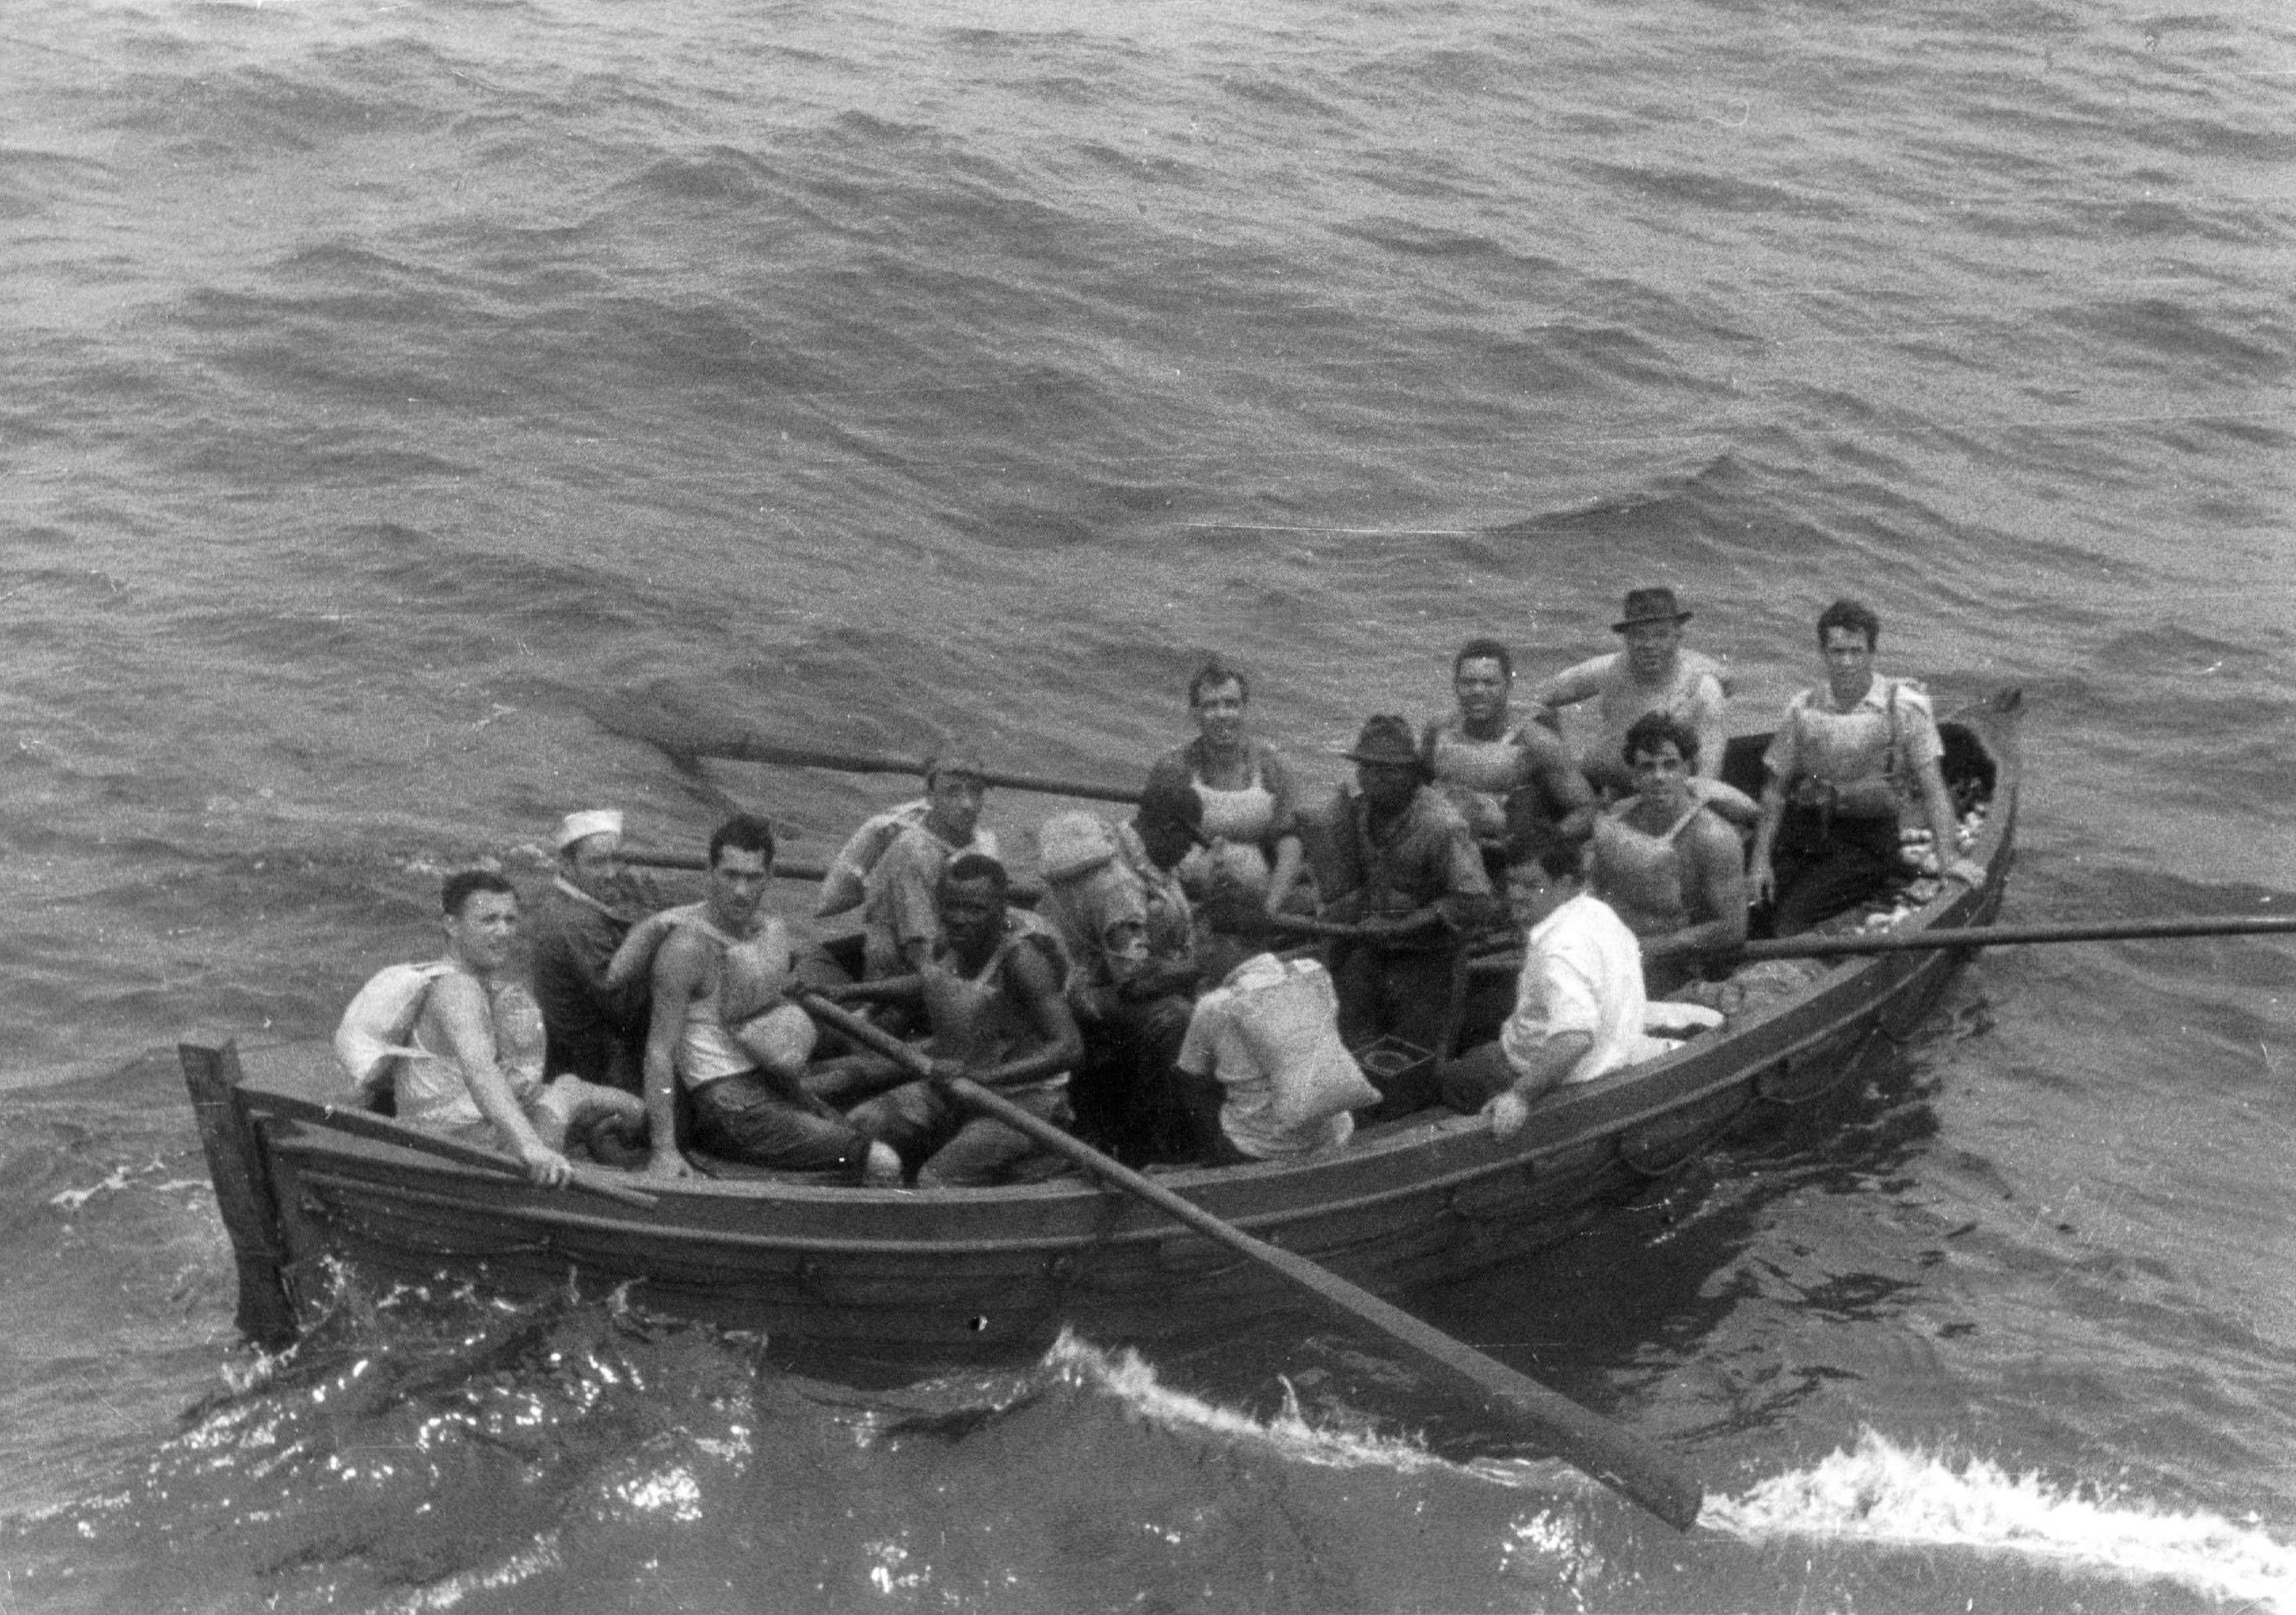 Photo of mariners in a lifeboat